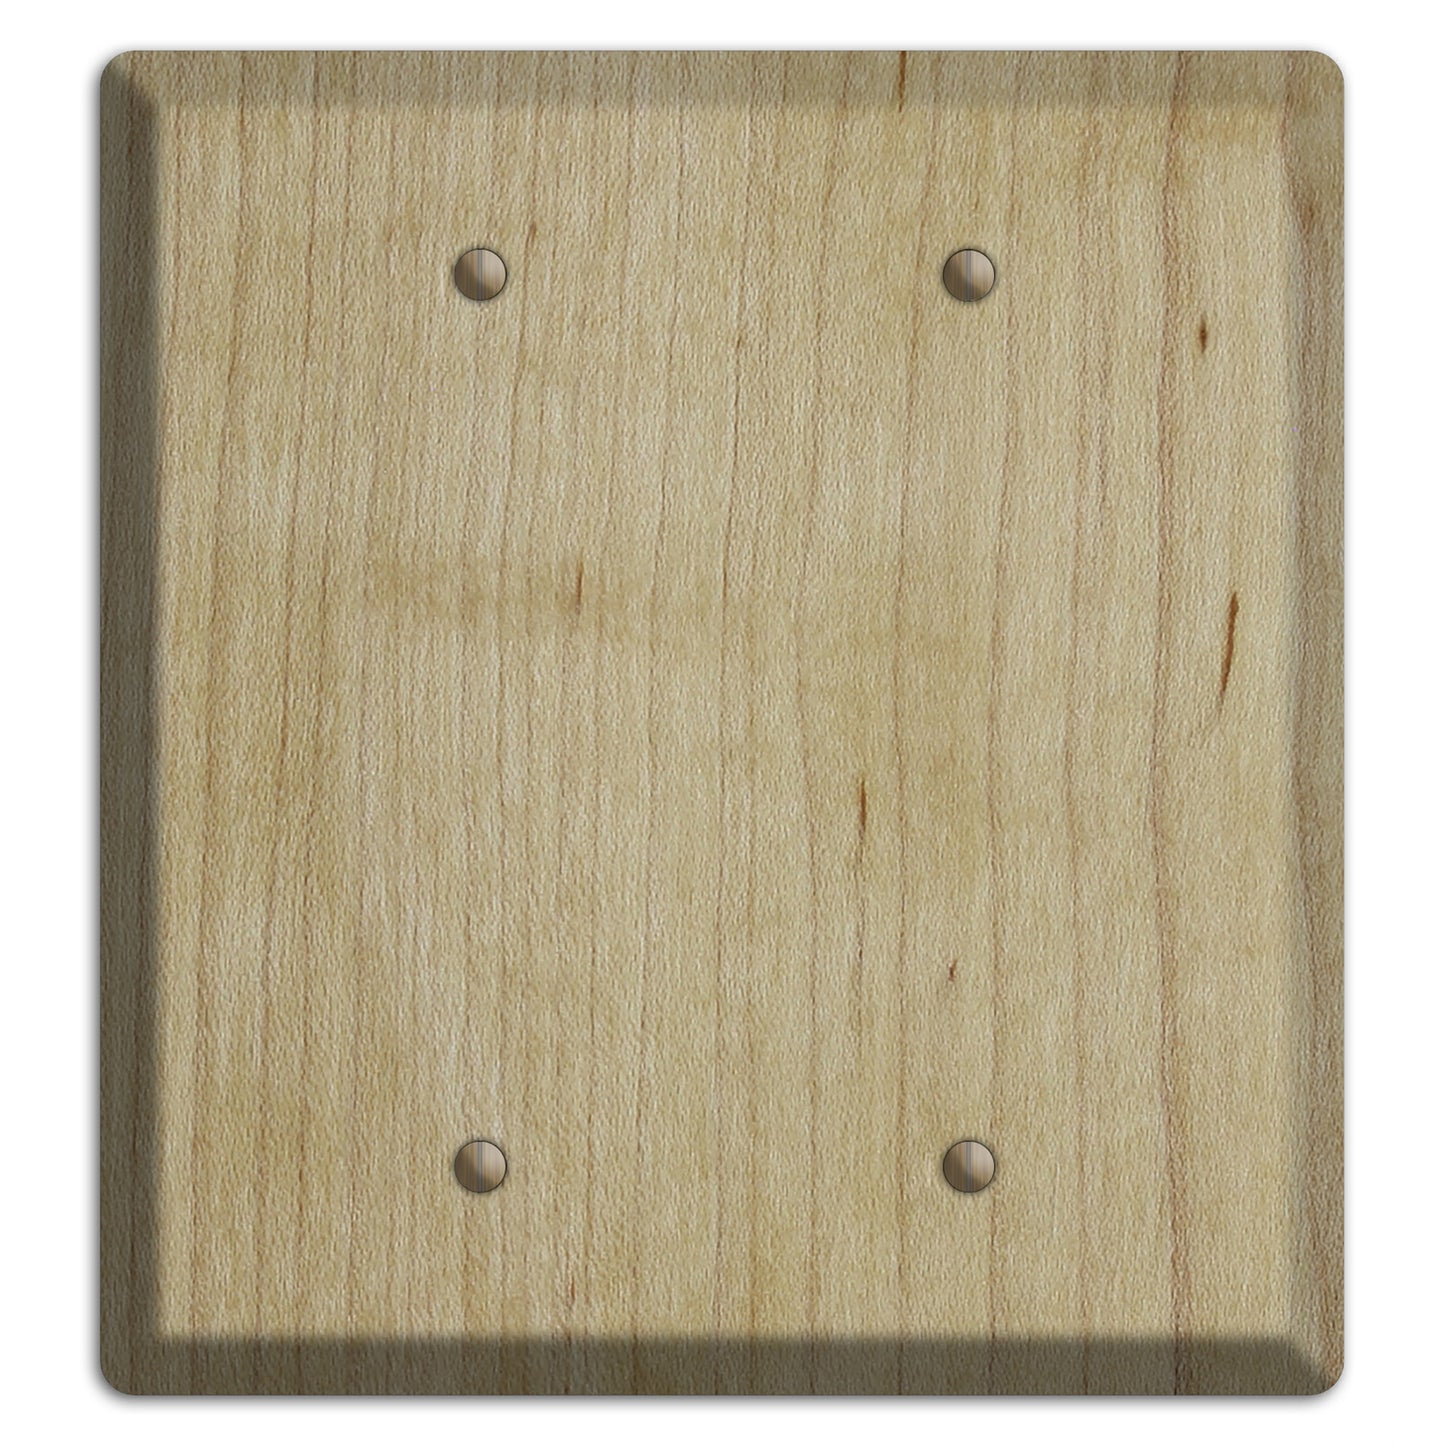 Maple Wood Double Blank Cover Plate